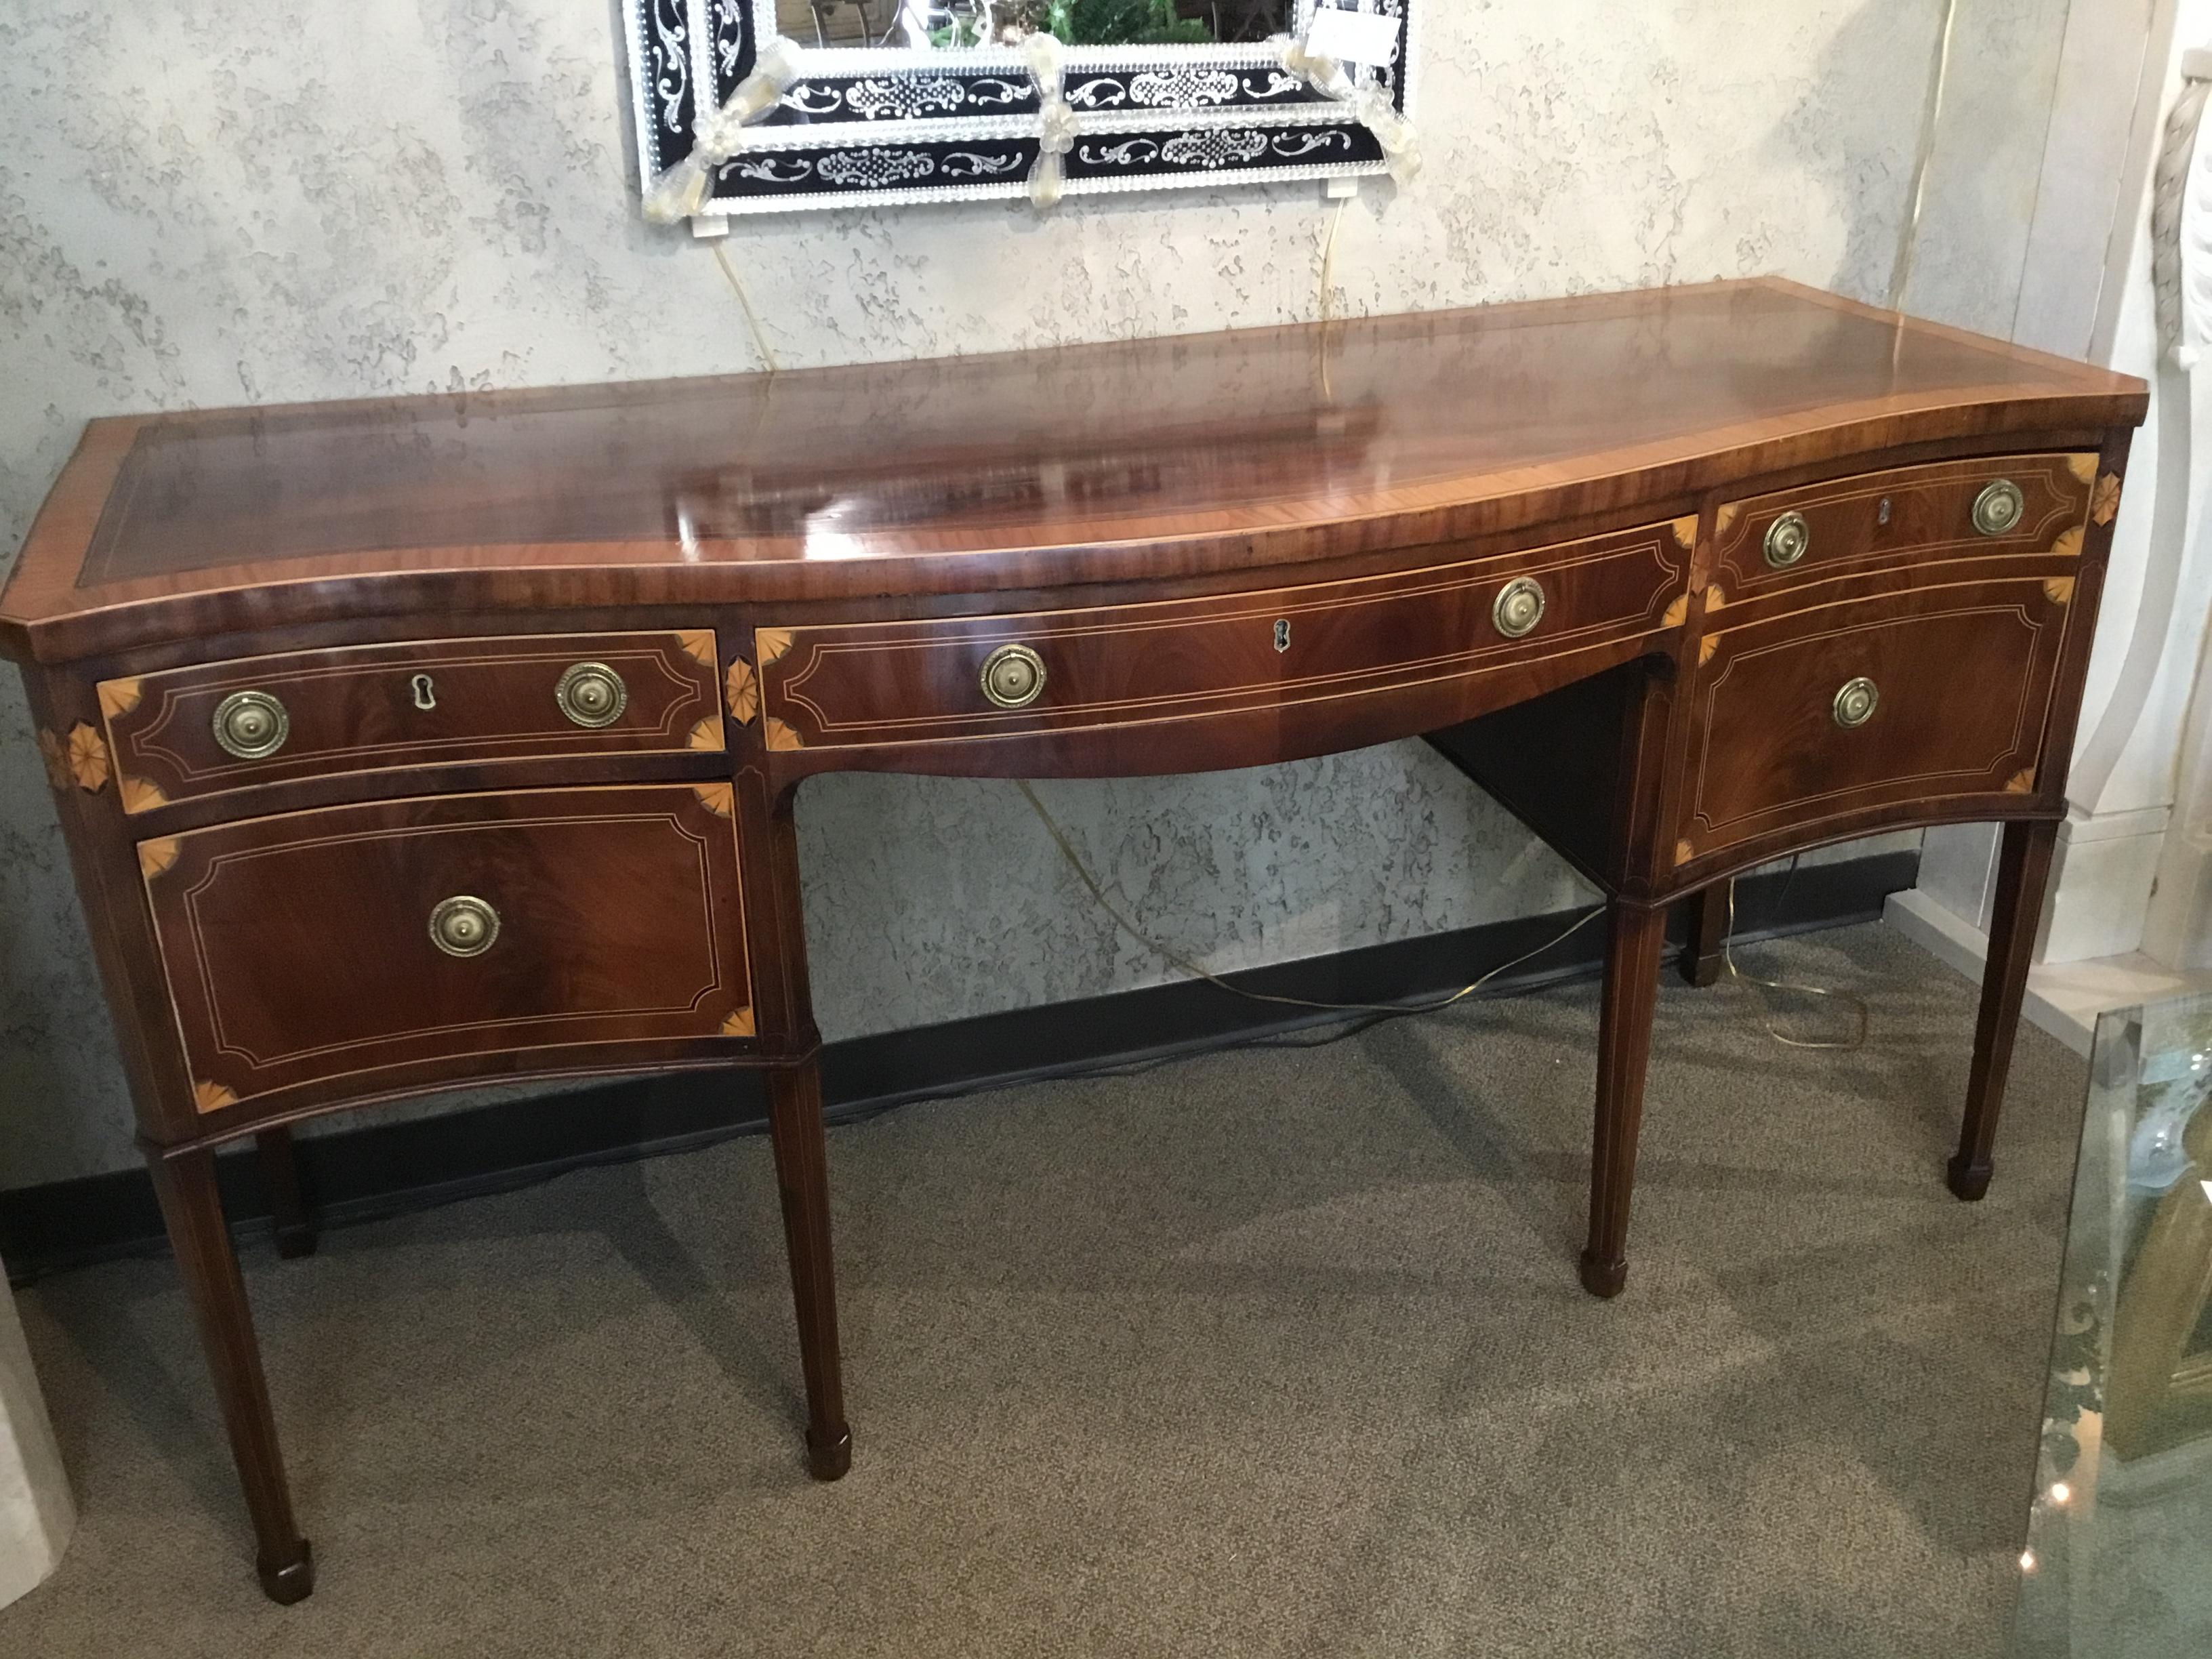 English, 19th century sideboard with fine marquetry inlay of satinwood and ebony. The flame mahogany
is lovely with the original finish and patina. The shape is of serpentine form with a graceful curve
to the center front. Three drawers under the